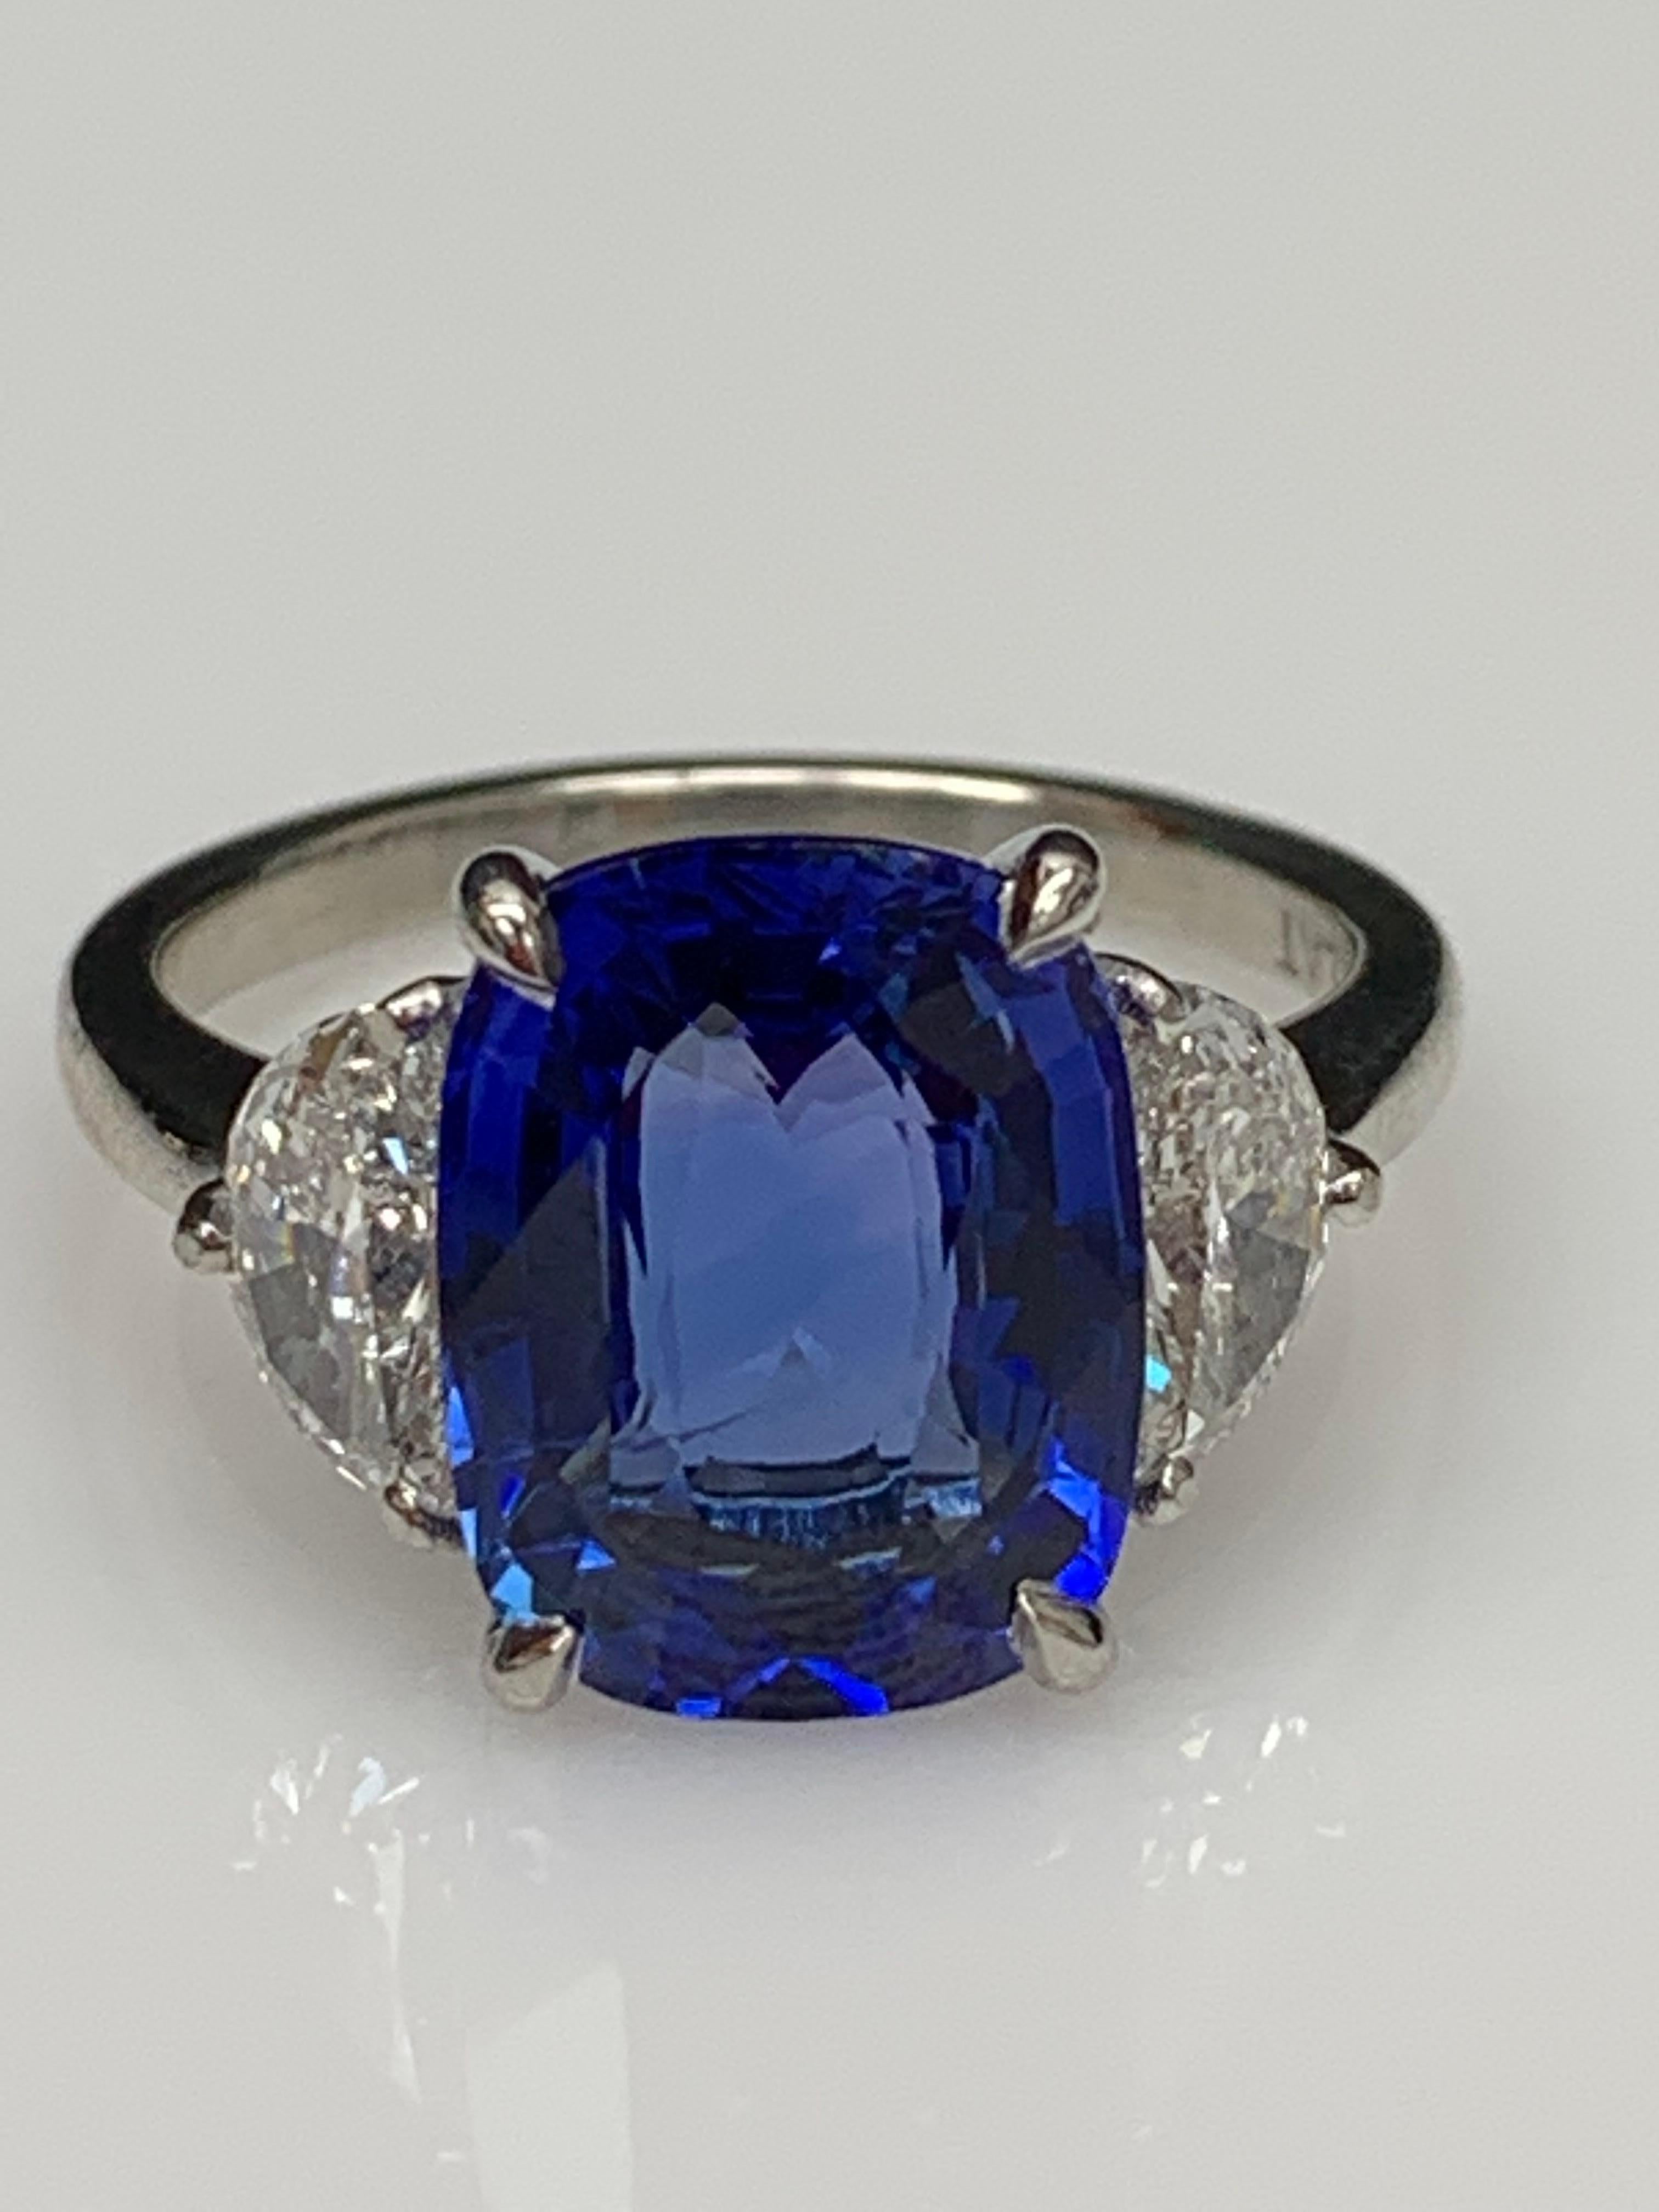 Showcases a Cushion cut, Vibrant color Blue Sapphire weighing 5.12 carats, flanked by two brilliant cut half moon diamonds weighing 0.89 carats total. Elegantly set in a polished platinum composition.